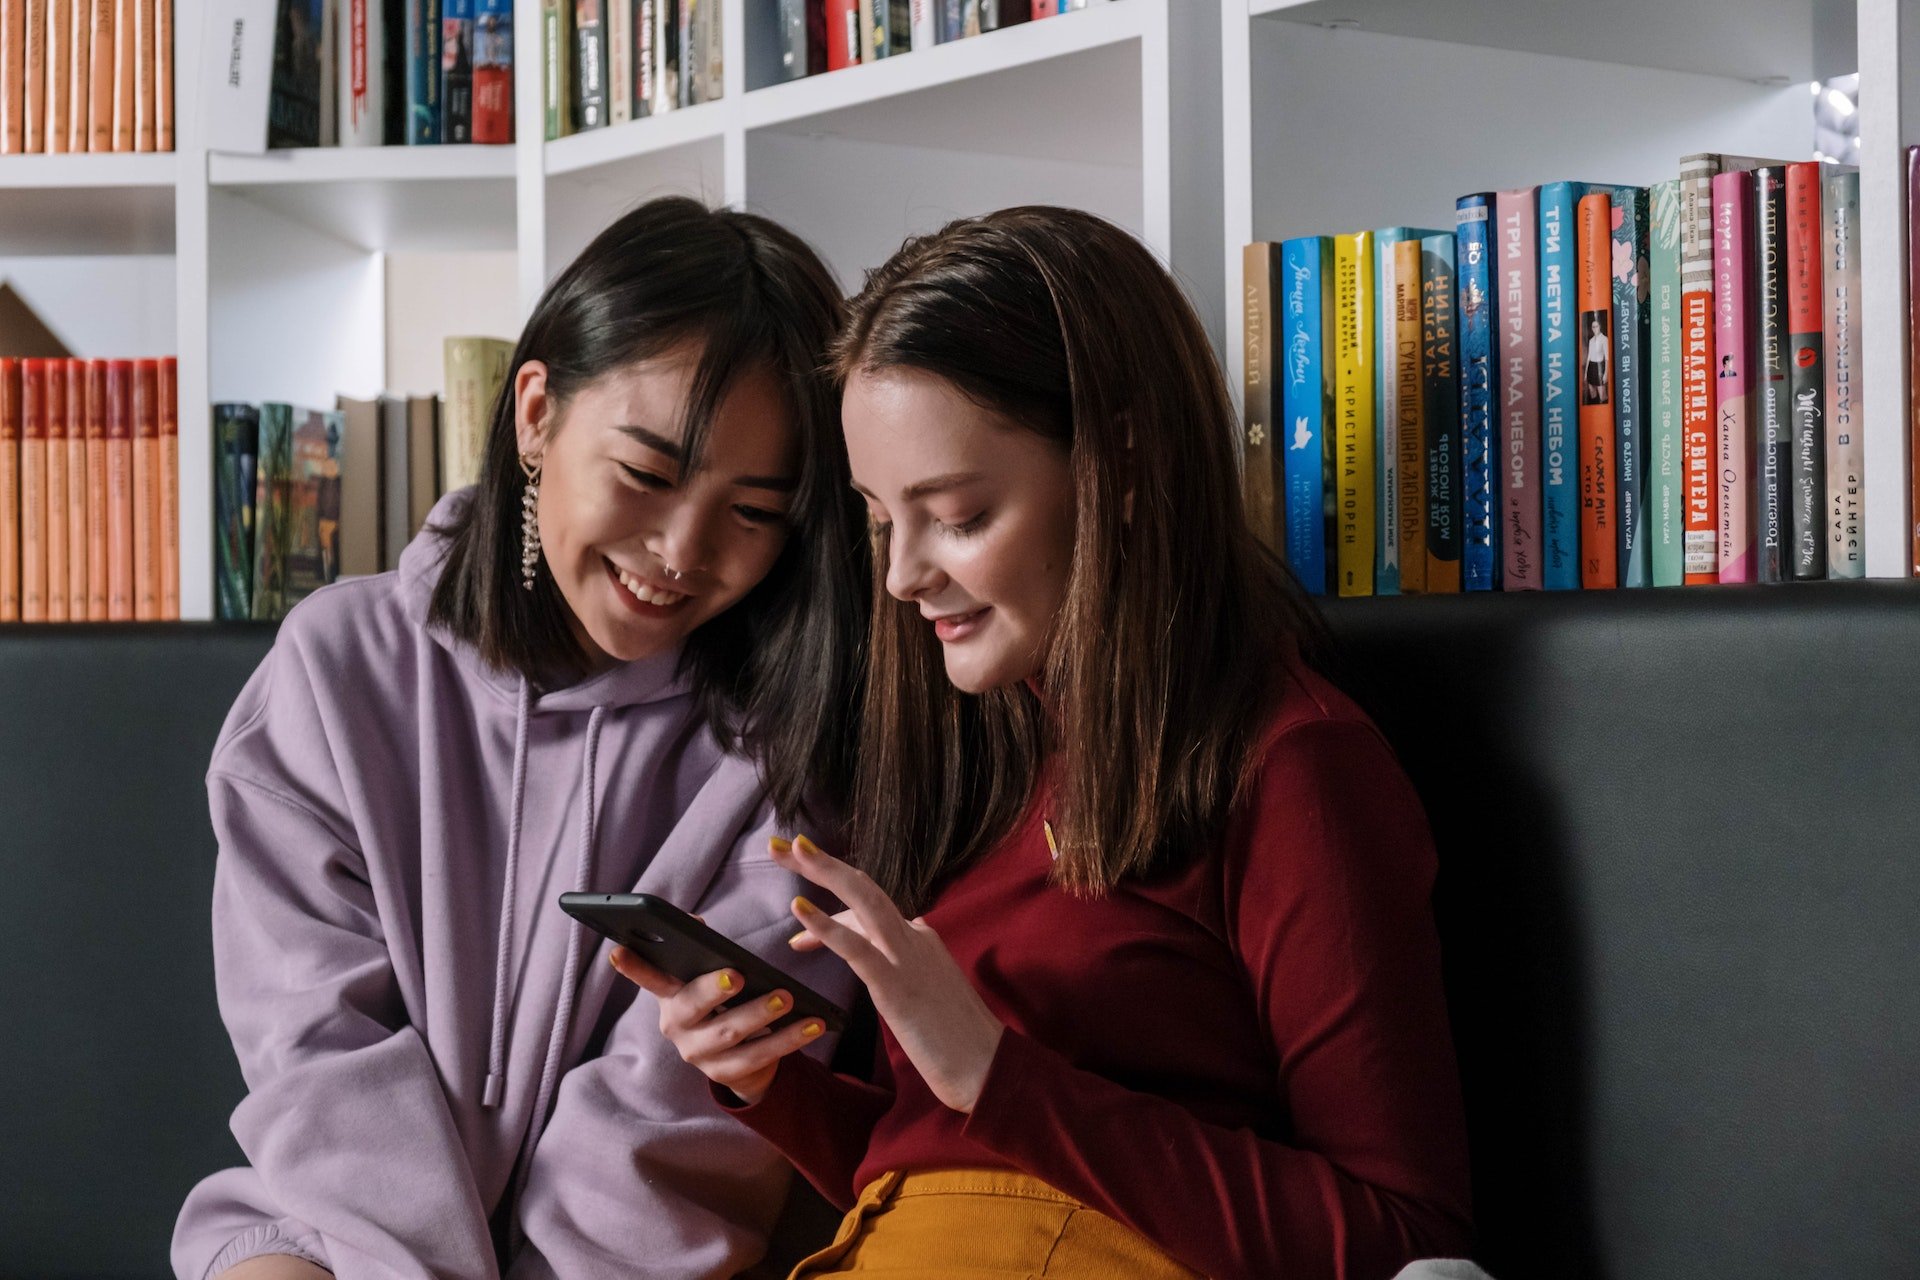 How Small and Mid-Market brands can connect with Gen Z